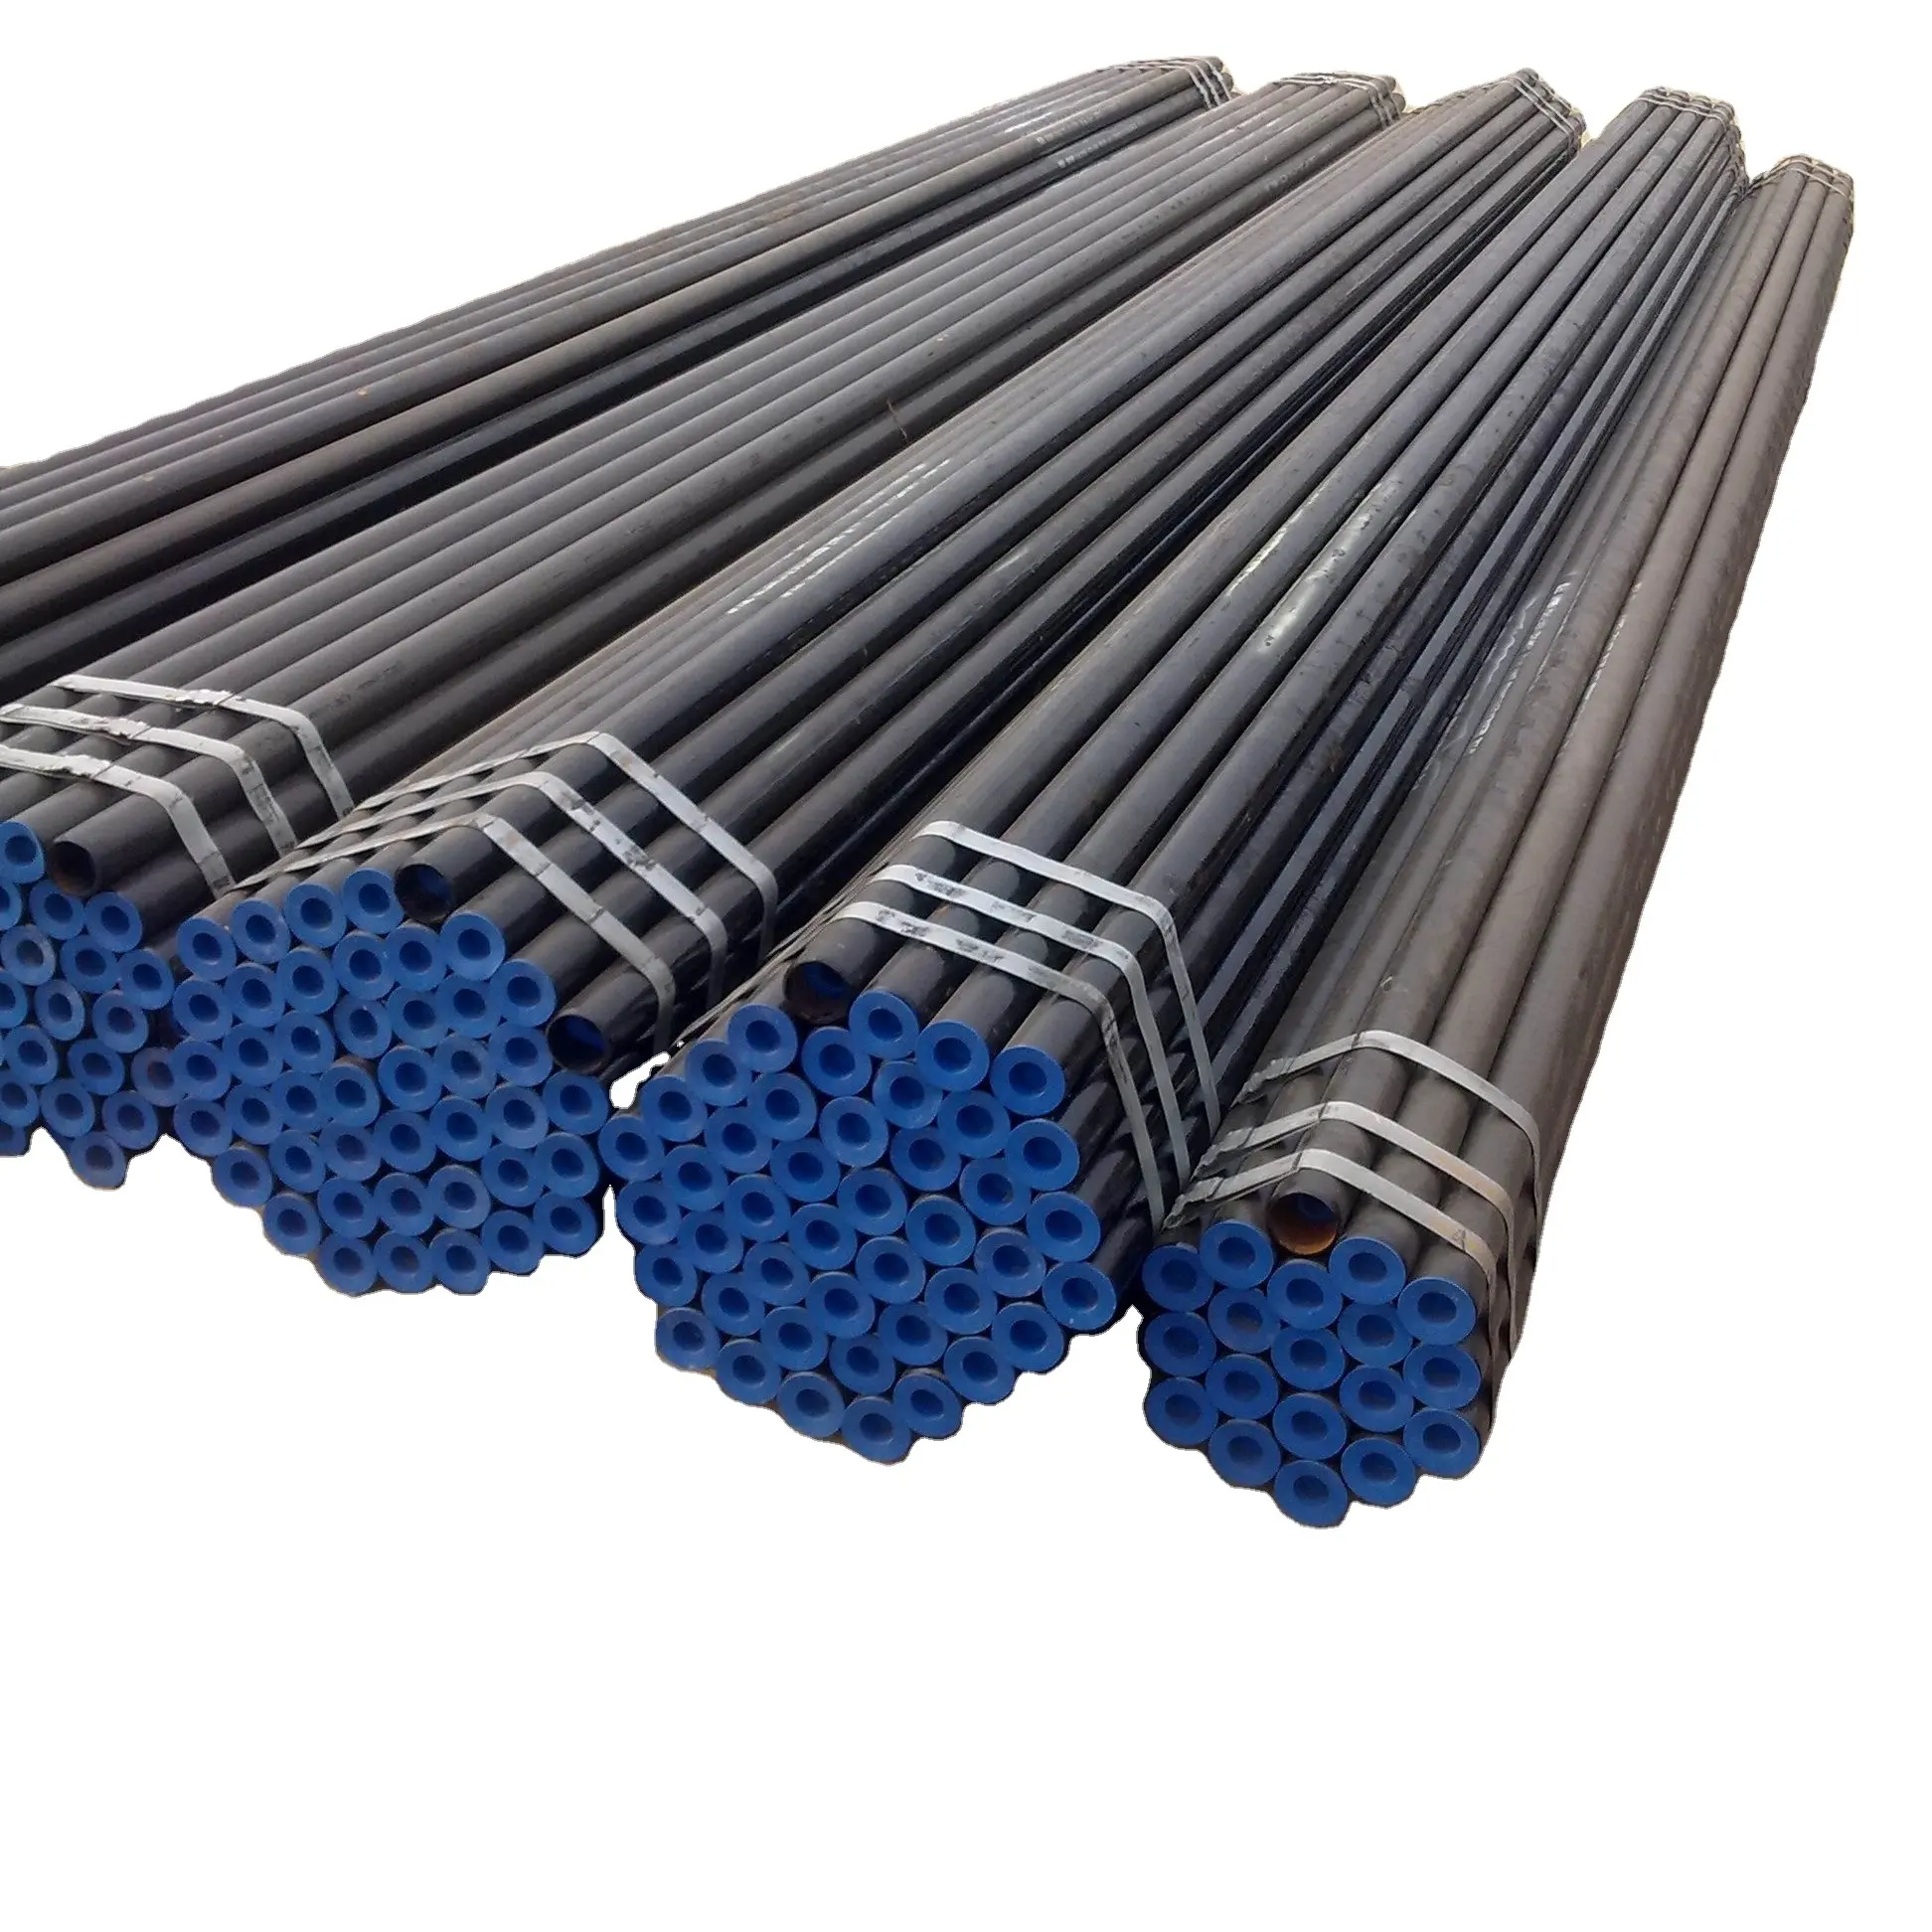 Hollow carbon seamless steel pipes taiwan 5.5 price 40 x 3.2mm 1.5 Inch 18 Inch 24 Inch 36 Inch pipe